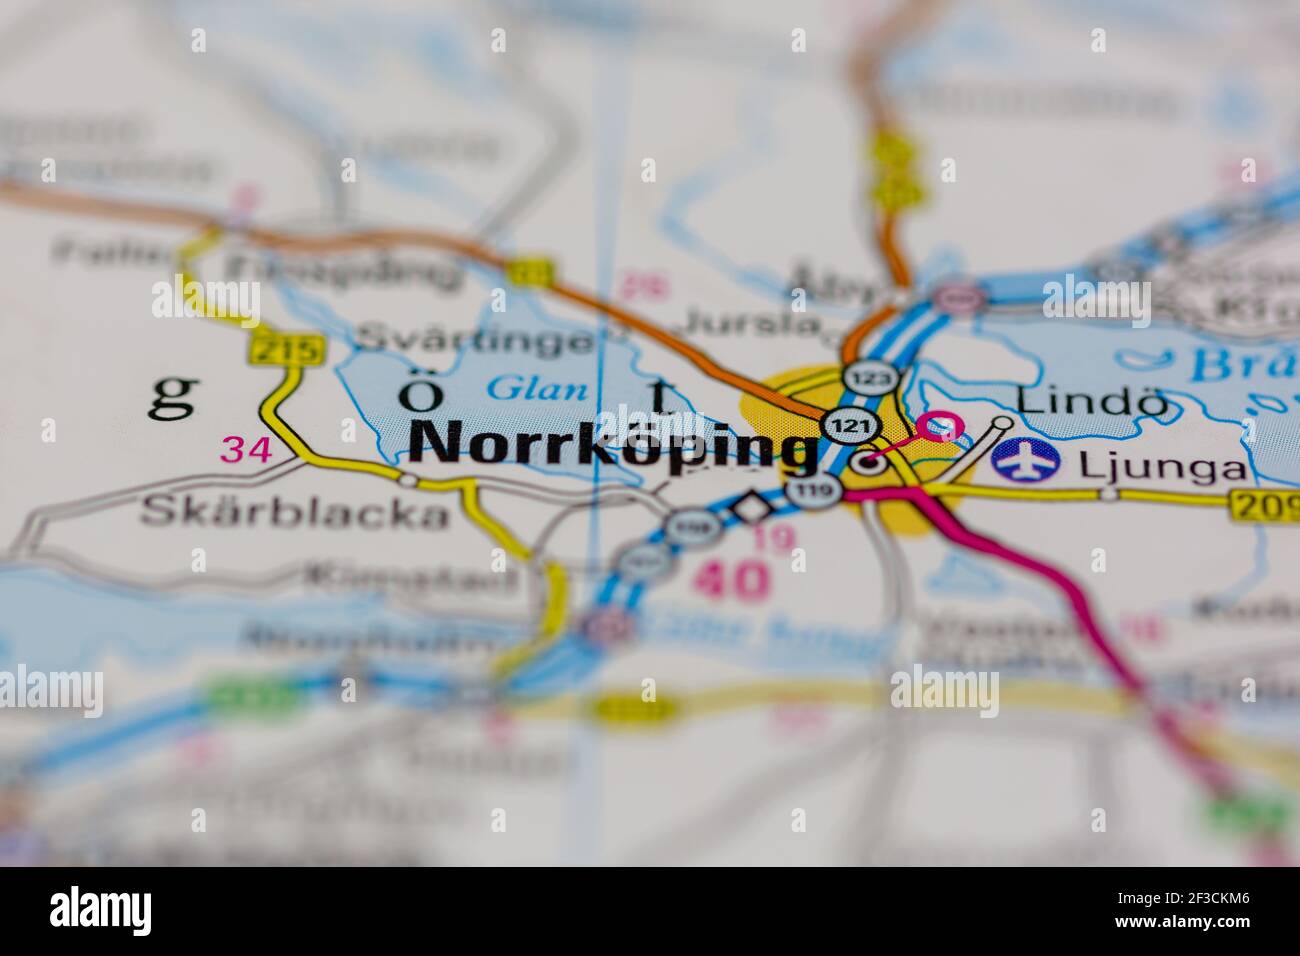 Norrkoping Shown on a geography map or road map Stock Photo